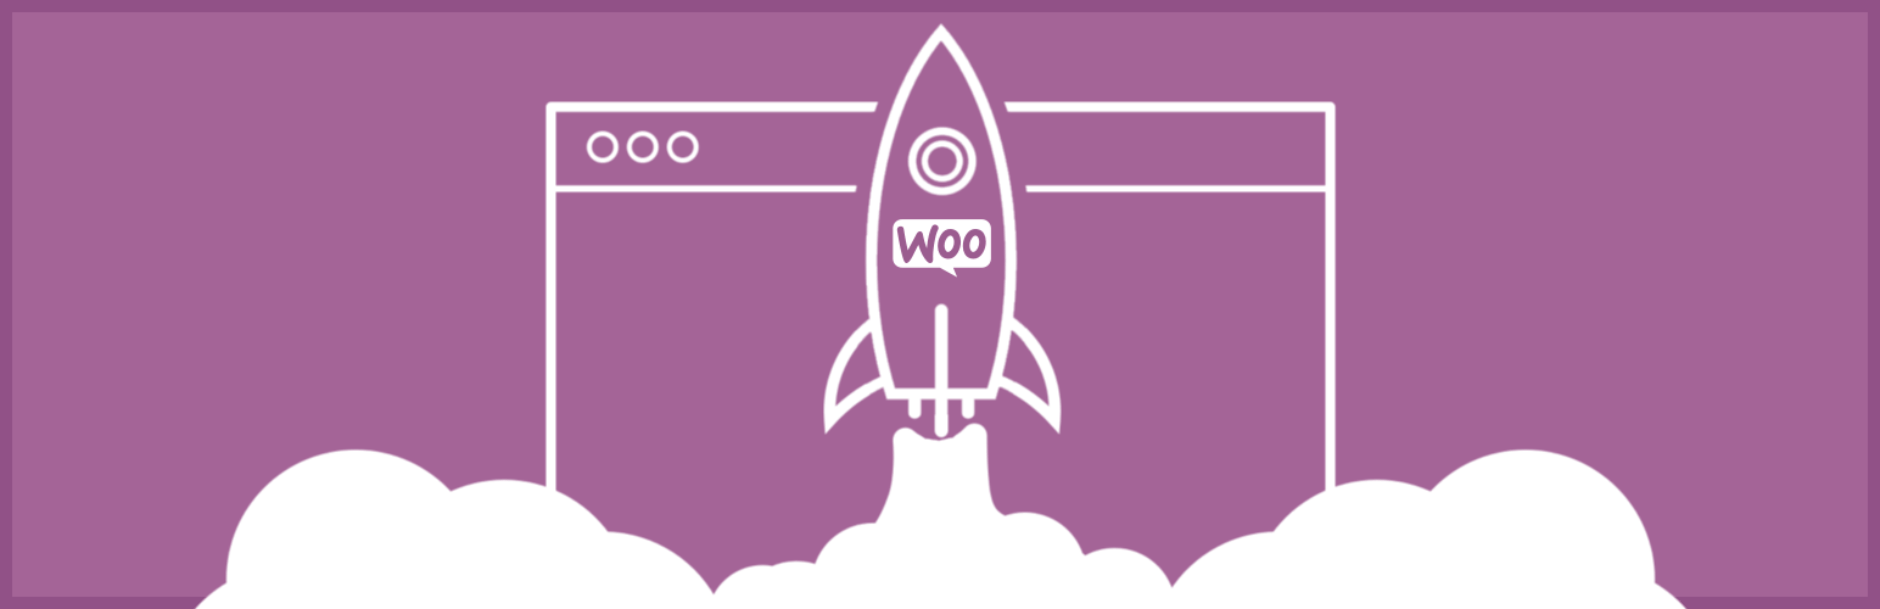 WooCommerce Woo Services Upgrade